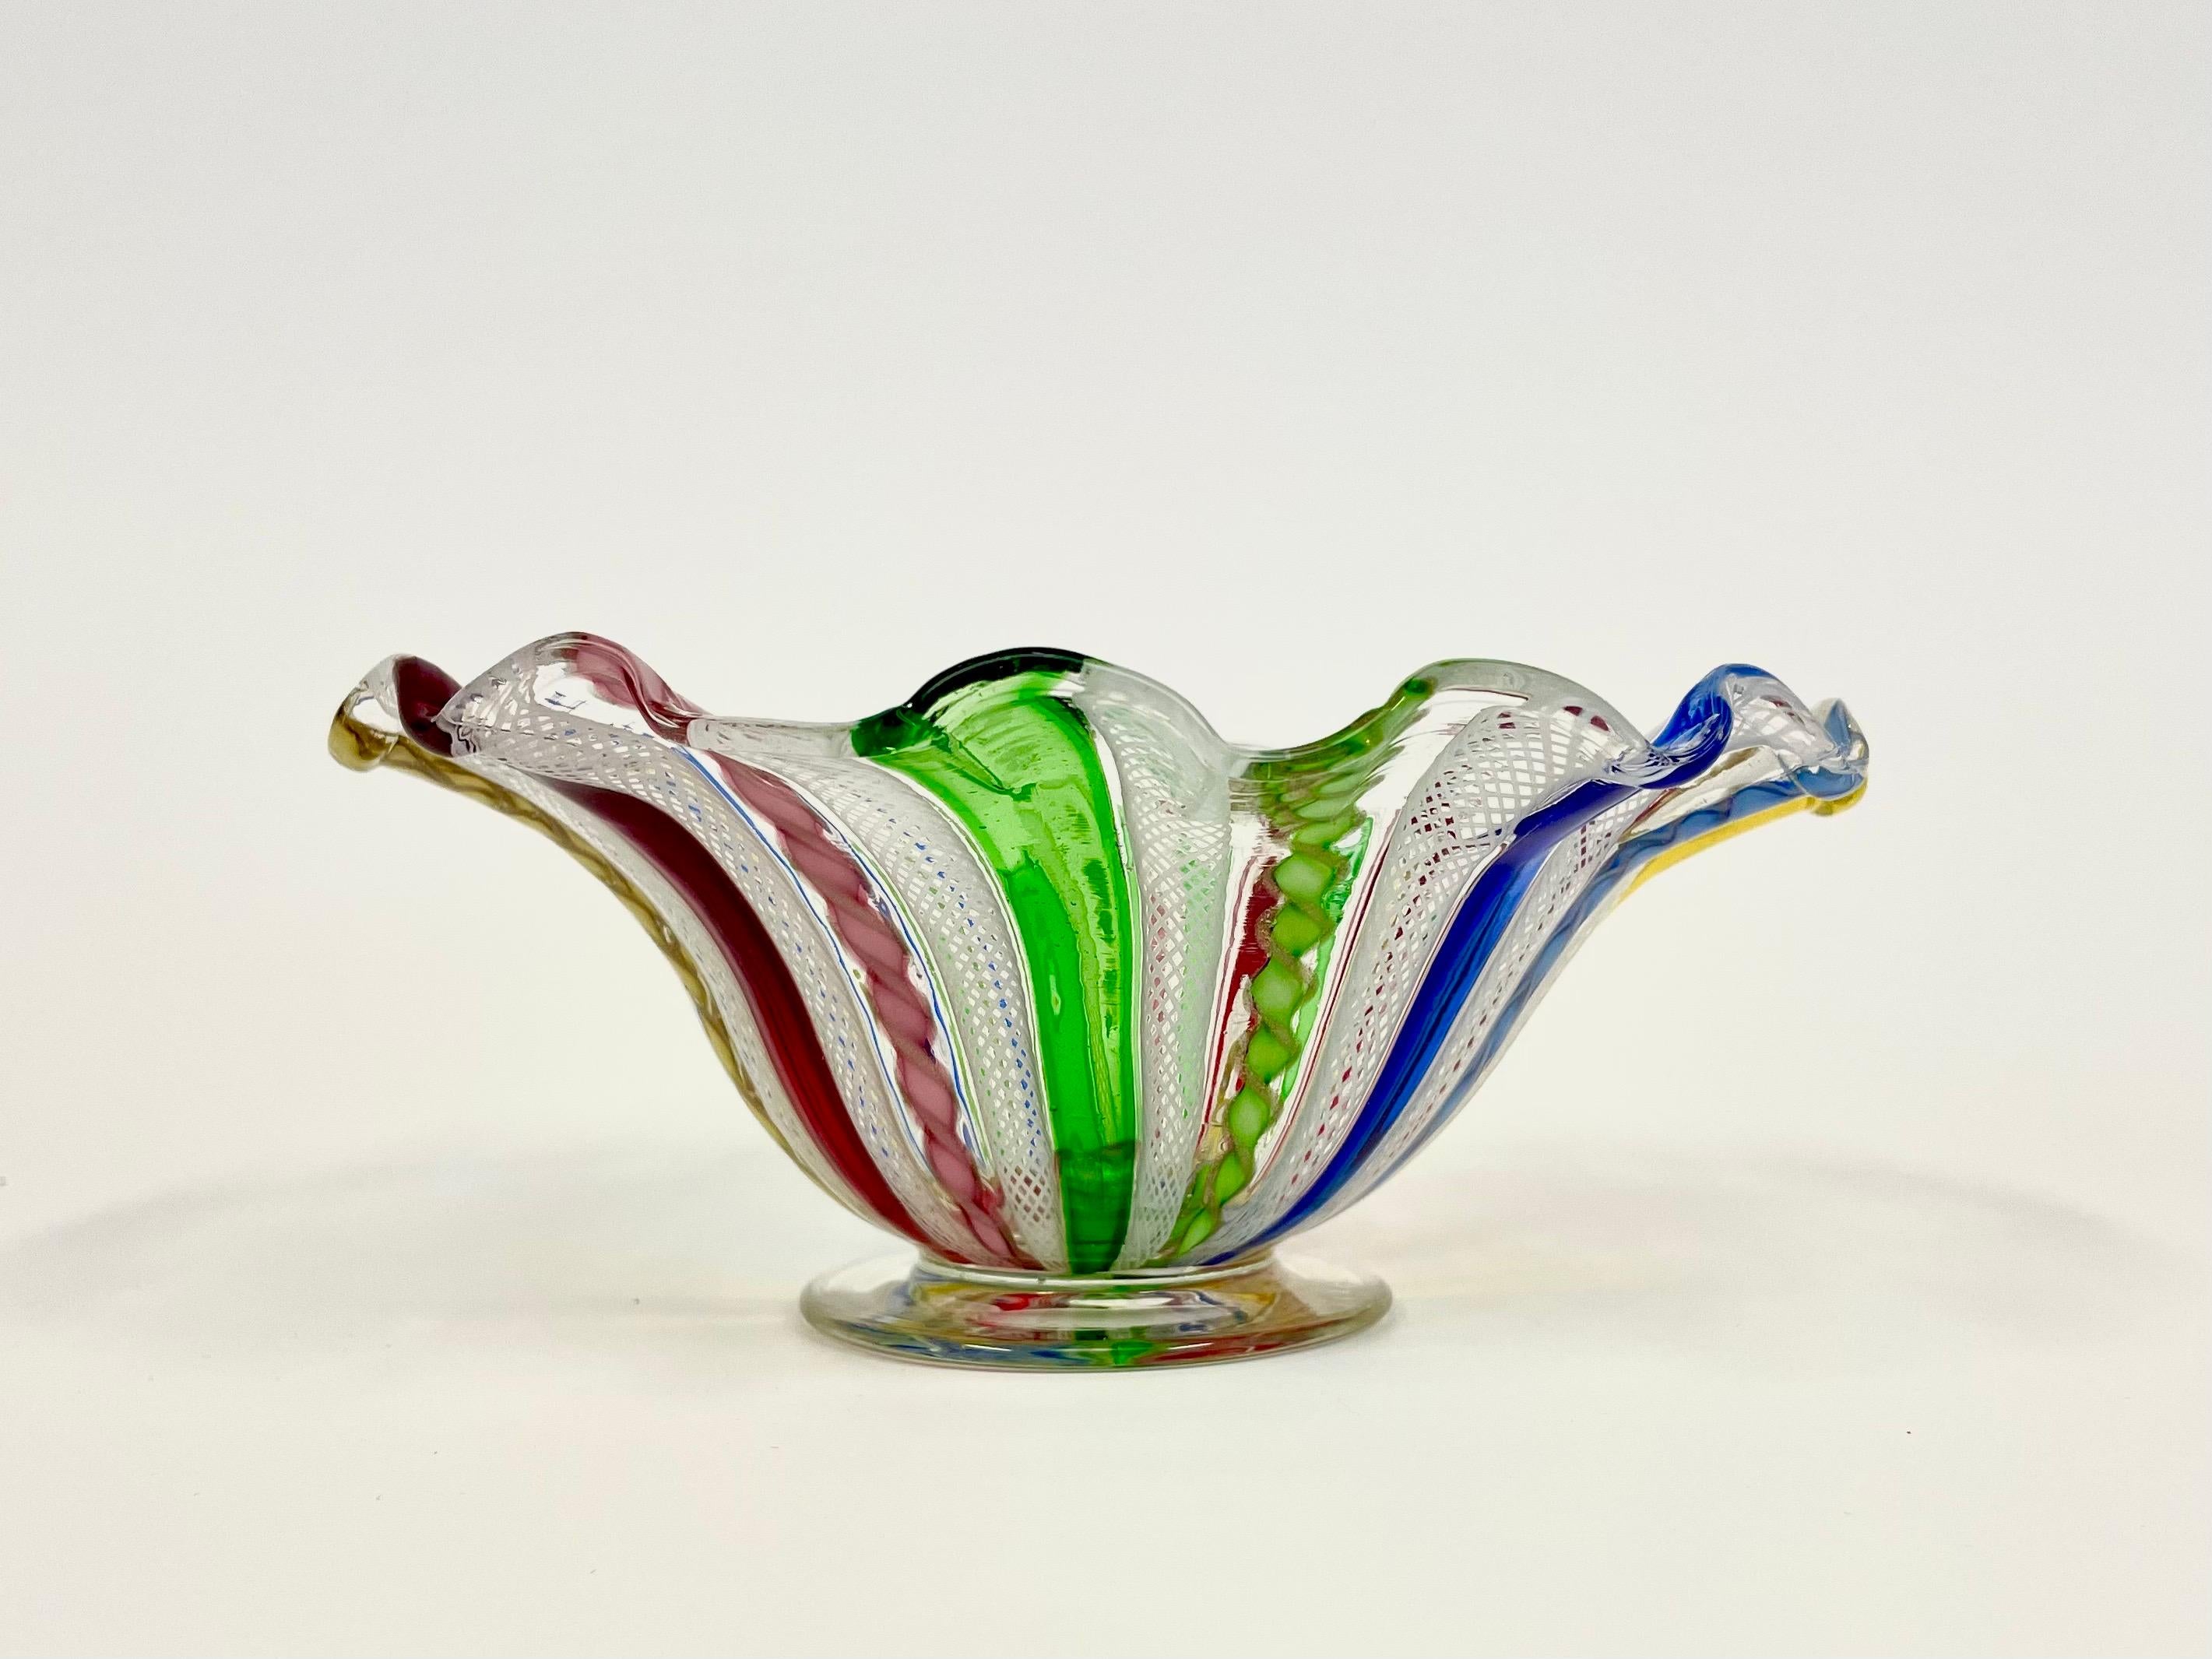 This is the Italian rainbow colored Venetian footed bowl in glass from Salviati, Murano. 
It comes decorated in colored translucent ribbons in blue, green, red and yellow on white foundation. 
Every other colored ribbon are twisted and sprinkled